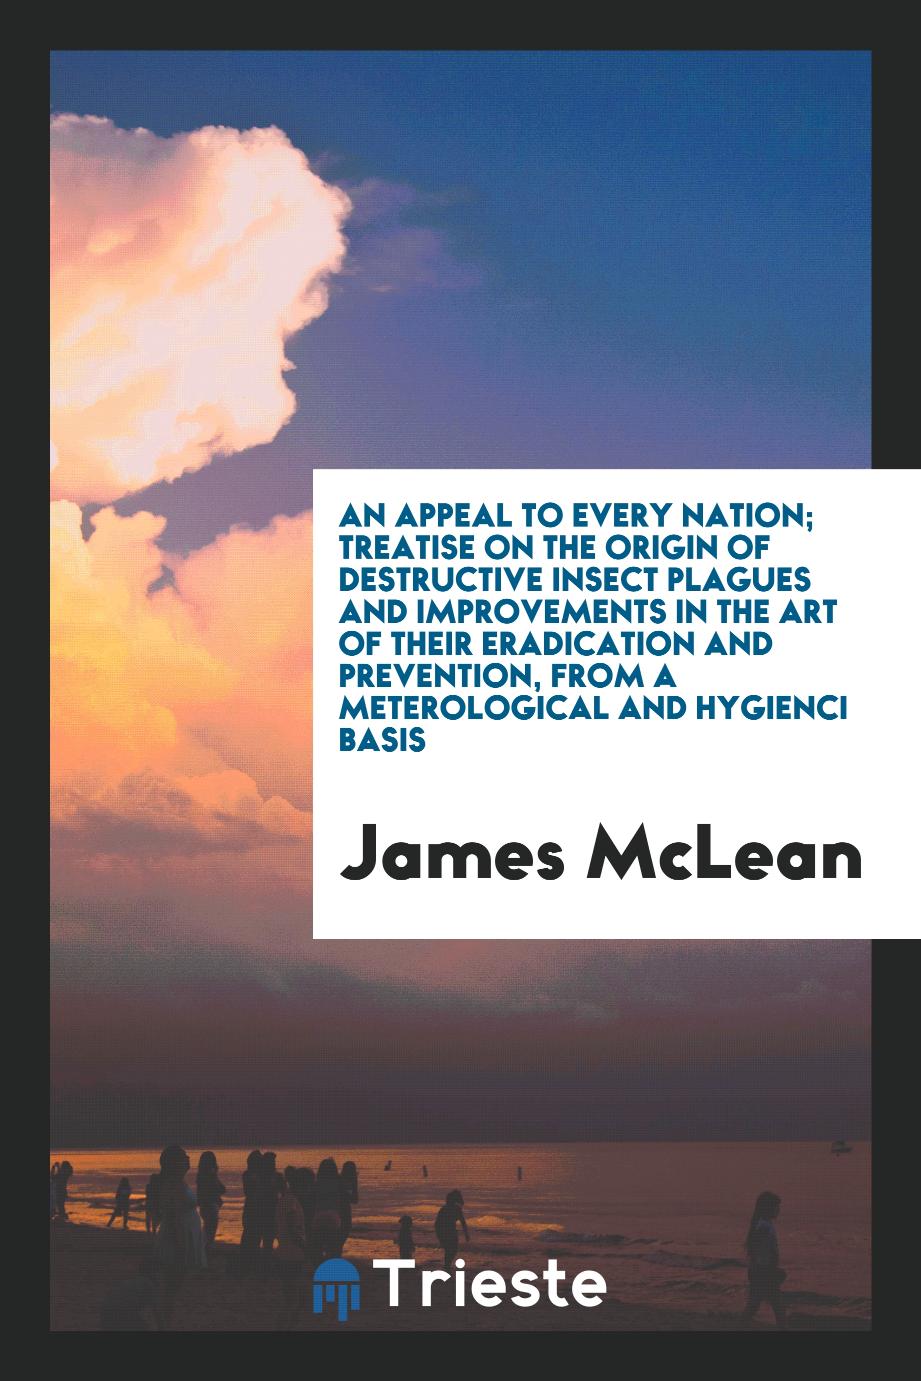 An appeal to every nation; treatise on the origin of destructive insect plagues and improvements in the art of their eradication and prevention, from a meterological and hygienci basis